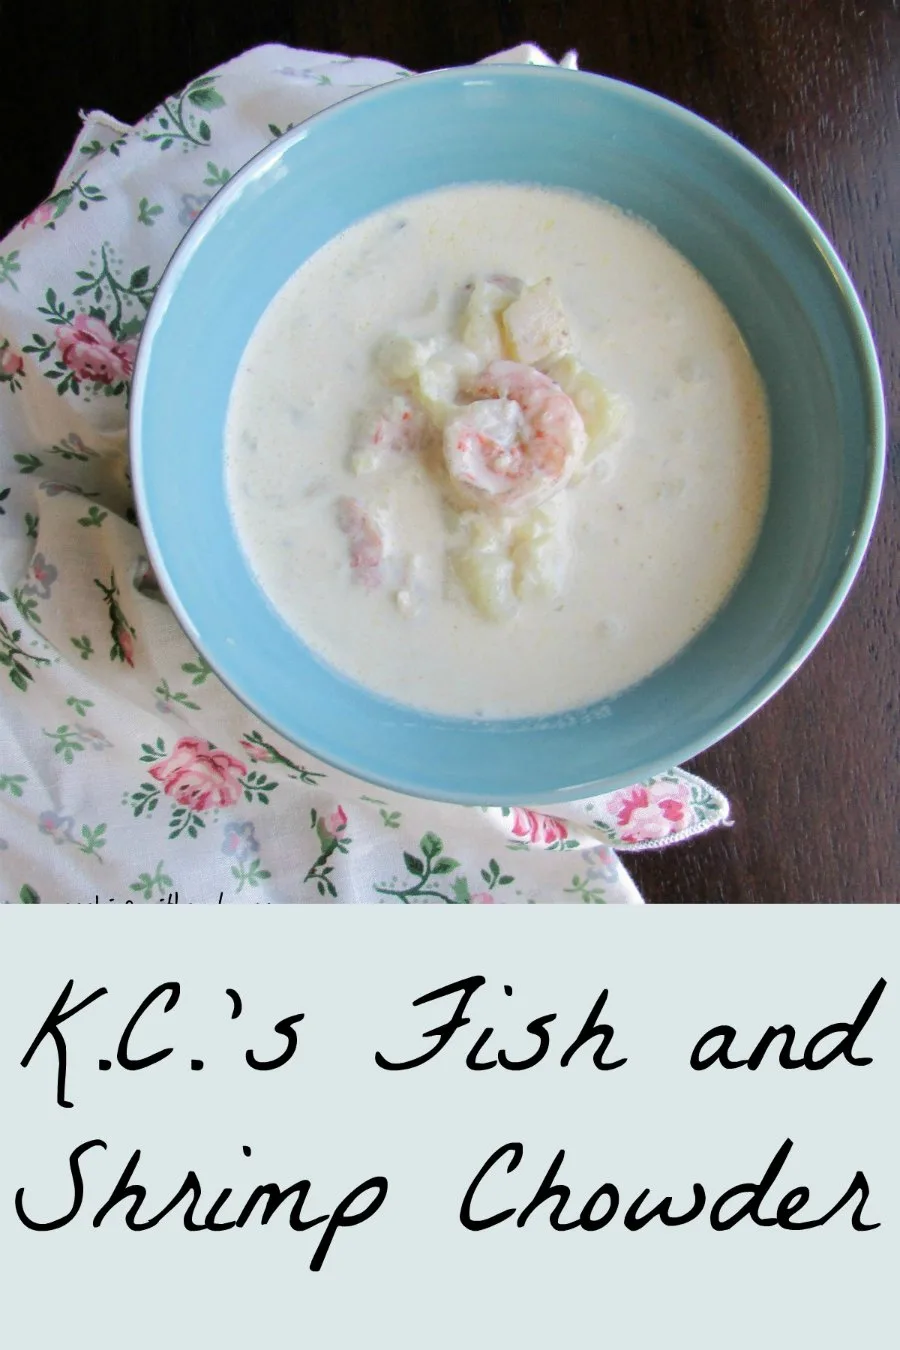 If you like a good seafood chowder, this one is sure to become your favorite. It is creamy, warming and comforting. Perfect for a fancy dinner or just because!